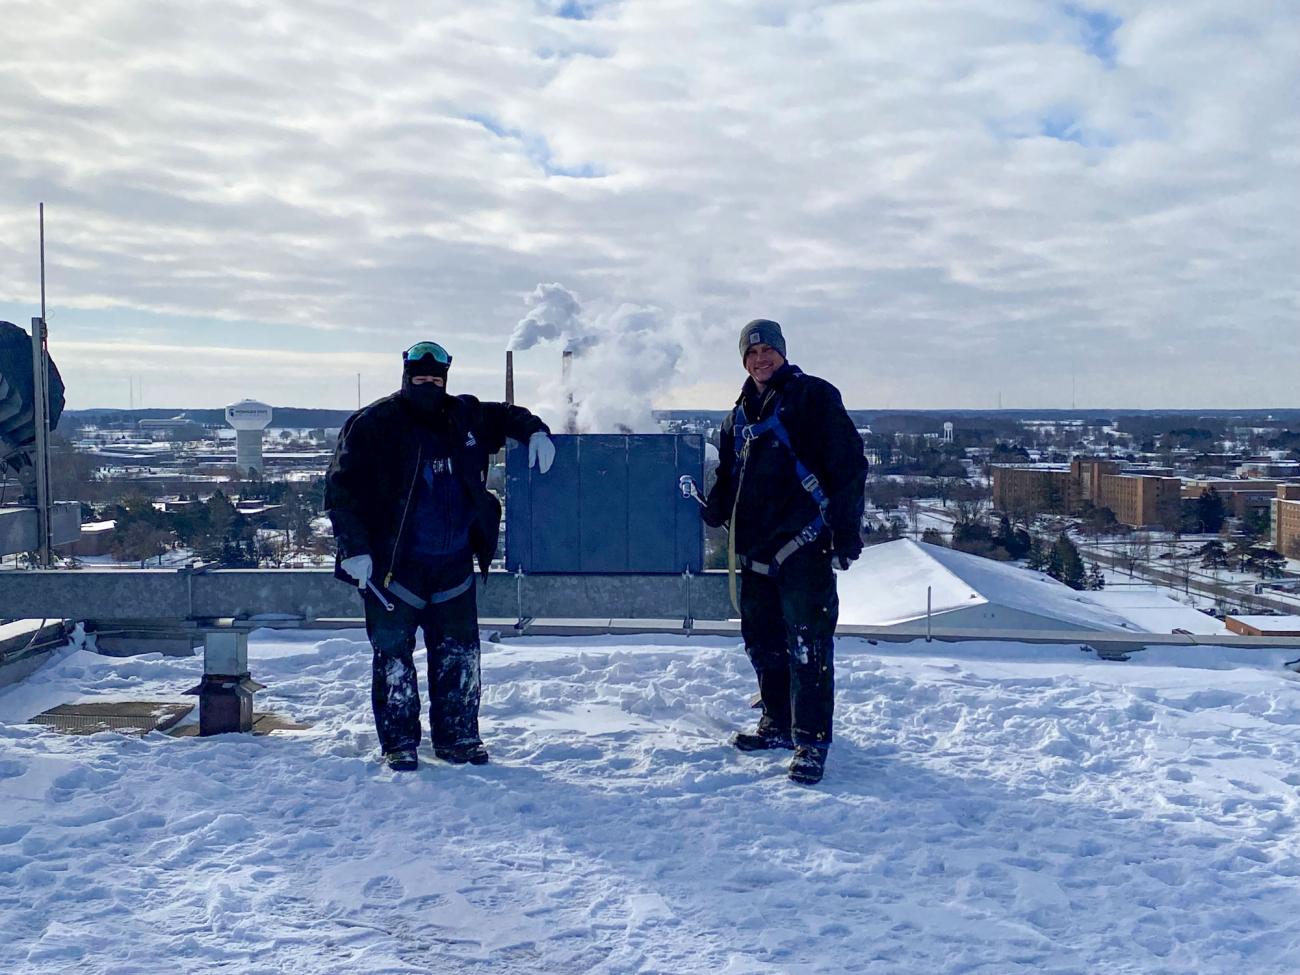 two men in cold weather gear smile on a snowy roof next to a pine box